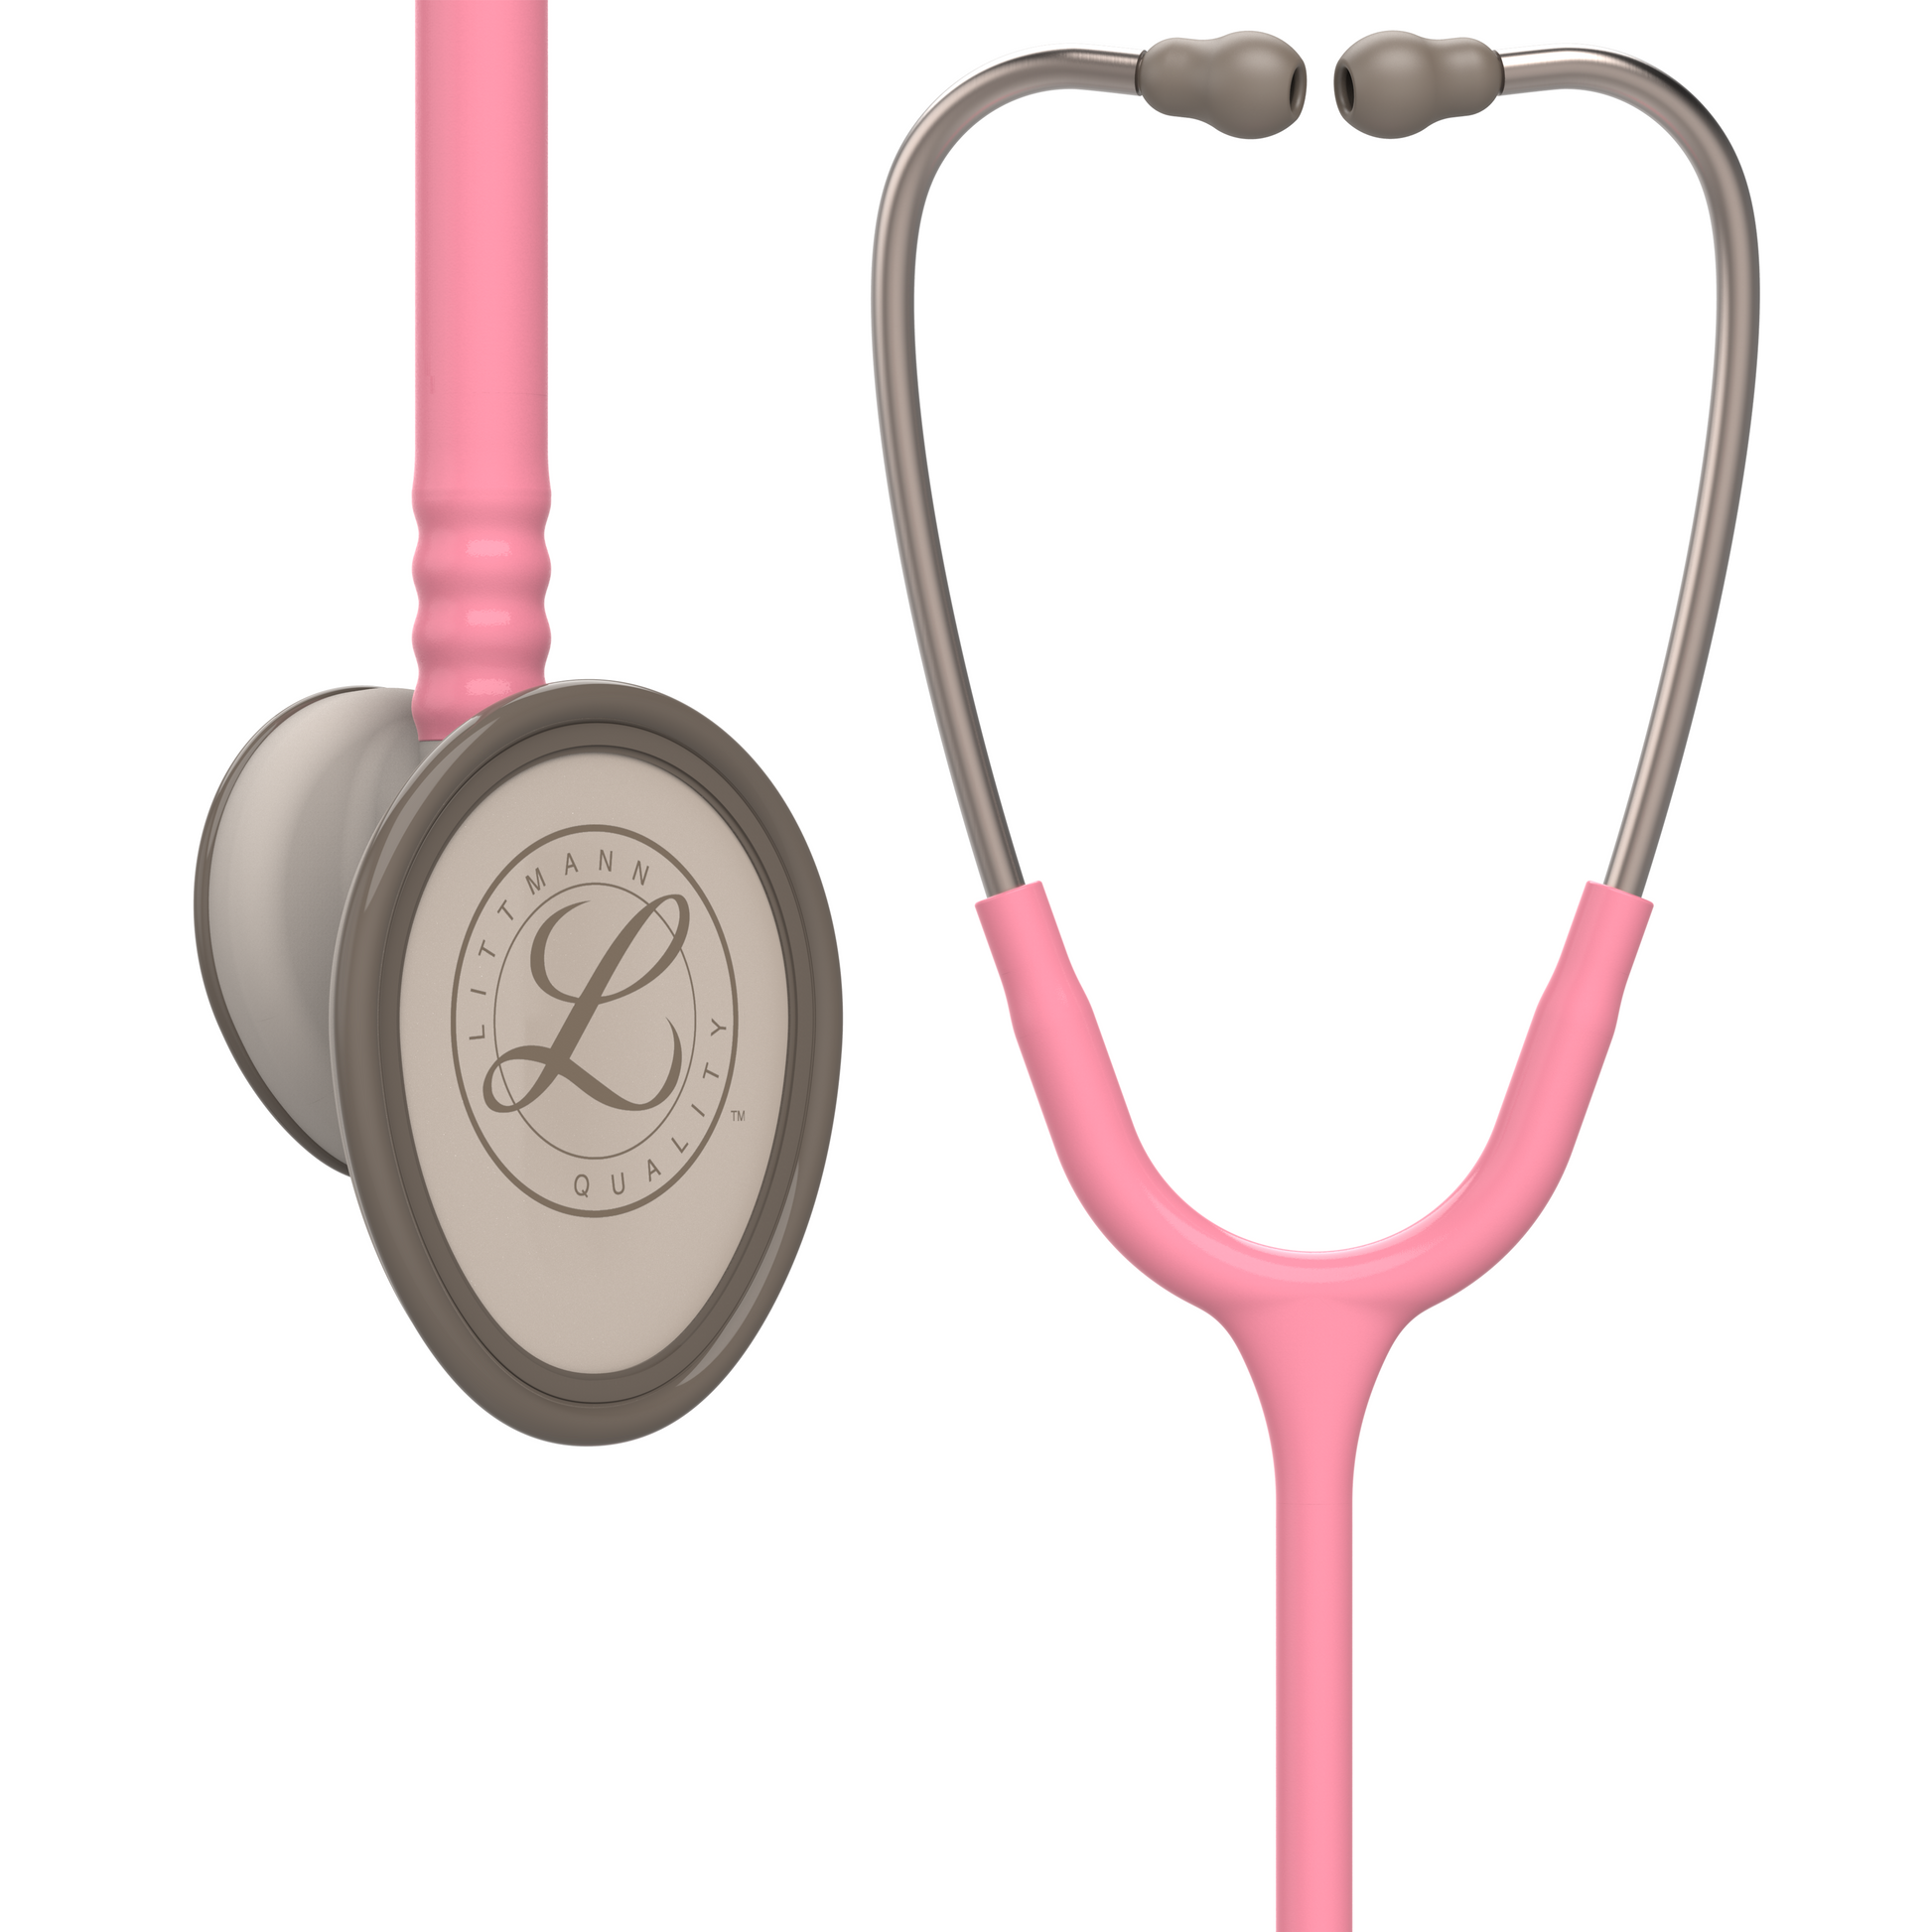 ROSY Personalized Stethoscope Case Bag Nurse Accessories 